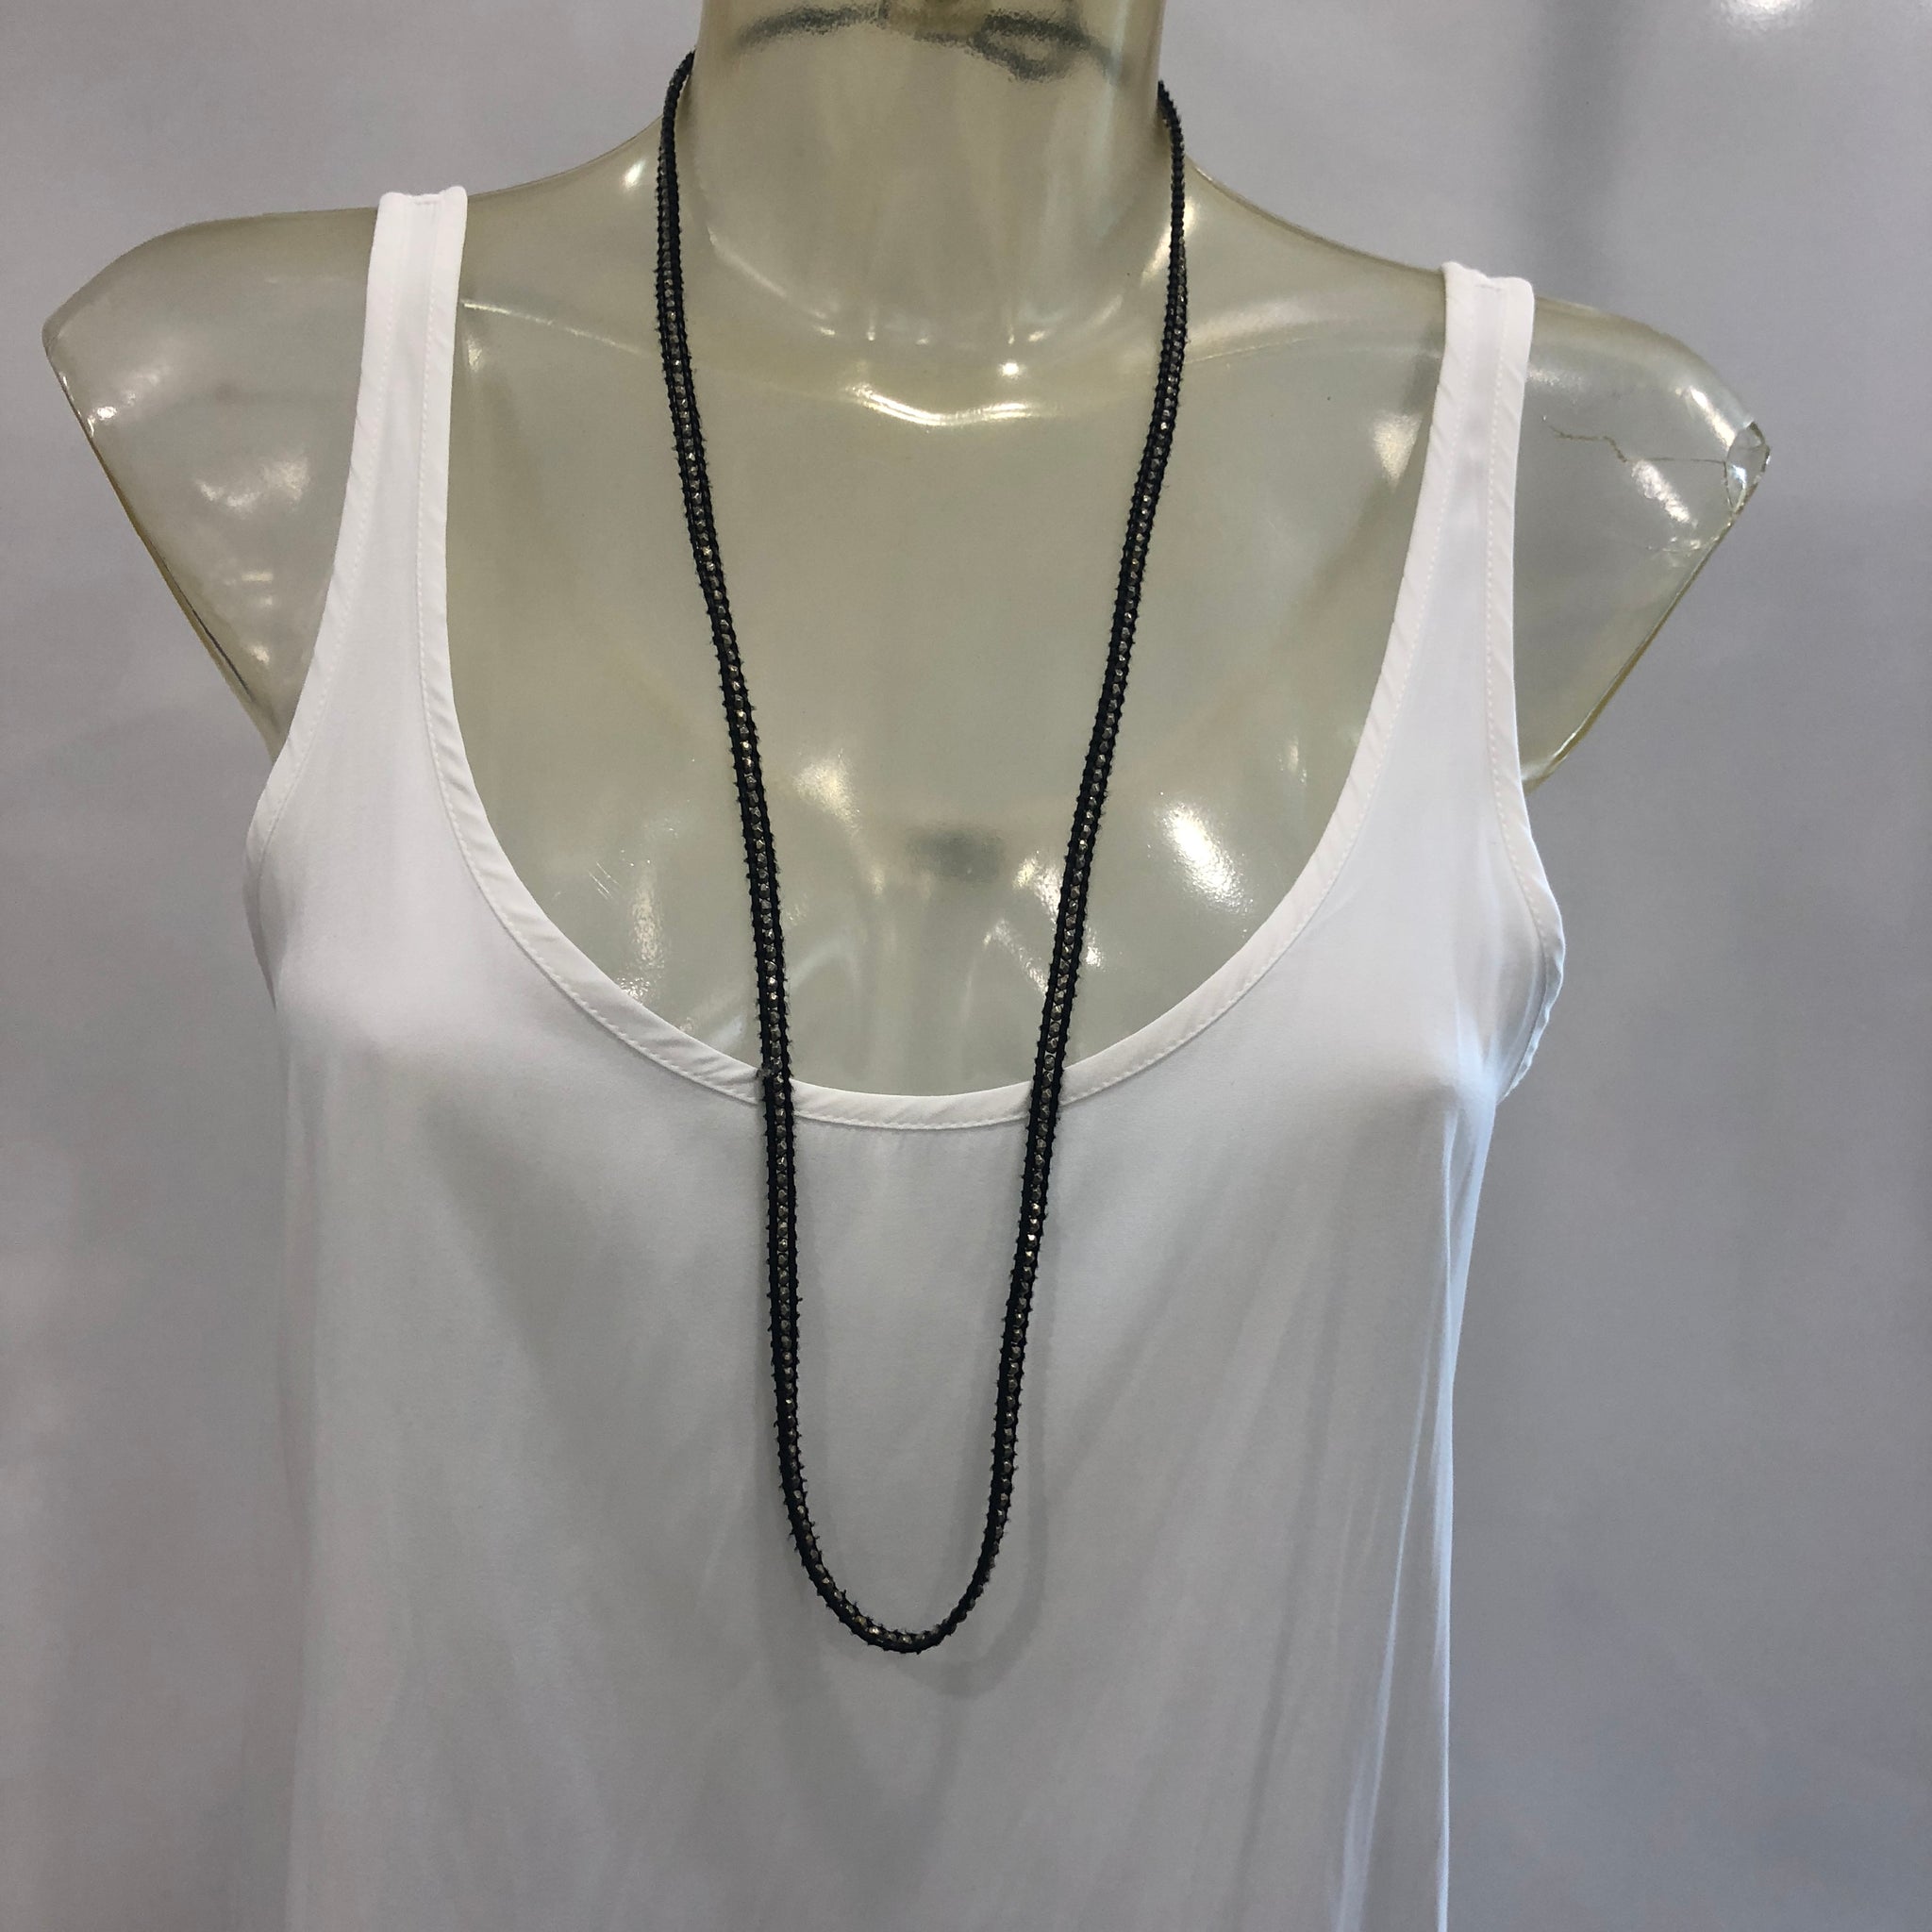 TM. Bead & Leather Necklace